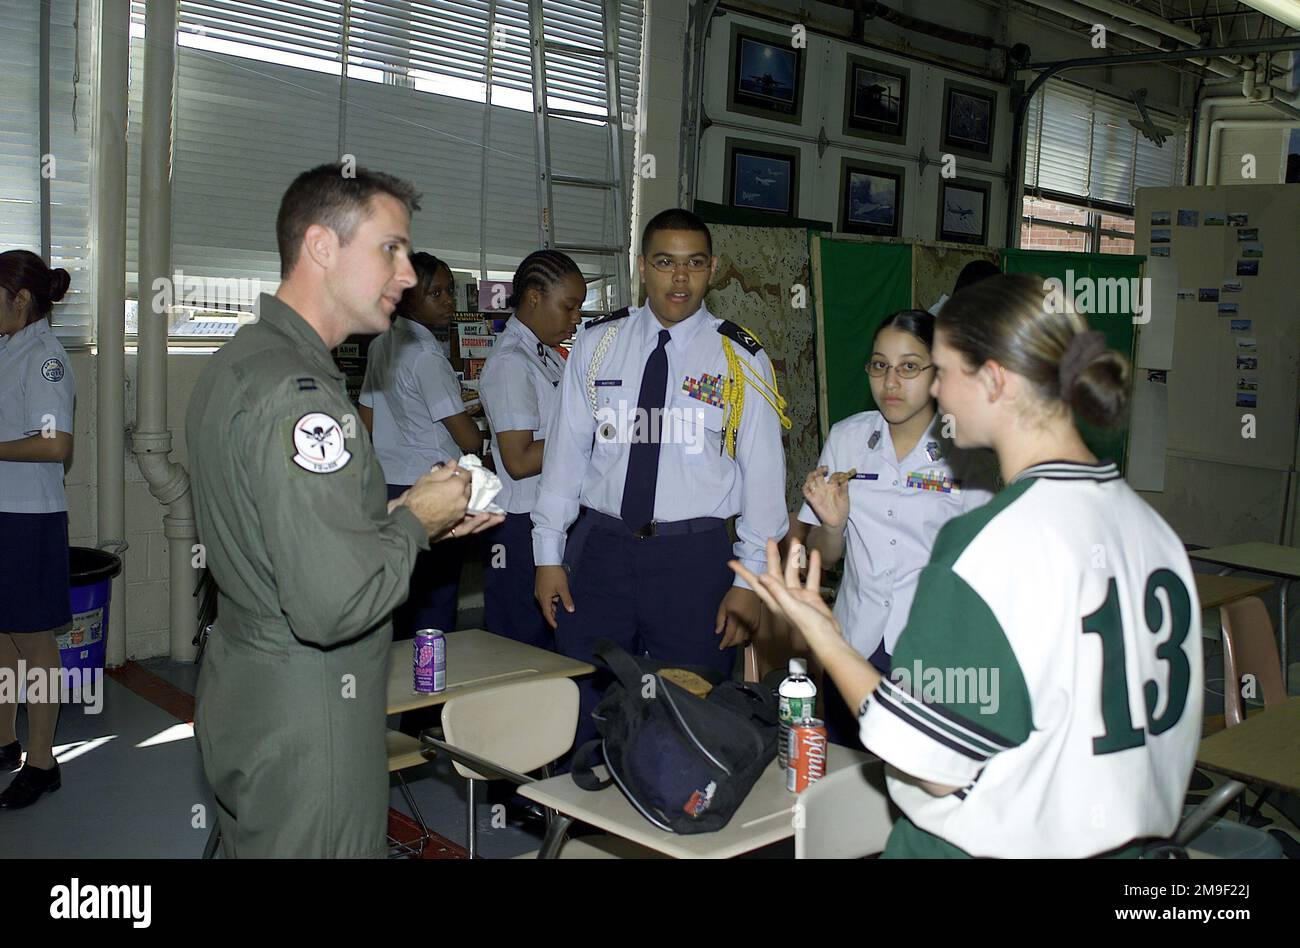 US Air Force Special Operations helicopter pilot, Captain Bill Denehen lectures to JROTC at Brentwood High School, NY on 11 May 00. On 2 May 99, while assigned with the 55th Special Operations Squadron, CPT Denehen and his crew courageously penetrated one of the most sophisticated air defense networks in the world to rescue an F-16C pilot (Not shown) trapped deep inside of Serbia. This was the first mission in history where a special operations rescue force penetrated and successfully defeated an active integrated air defense system of a determined military. During Operation Allied Force, Dene Stock Photo